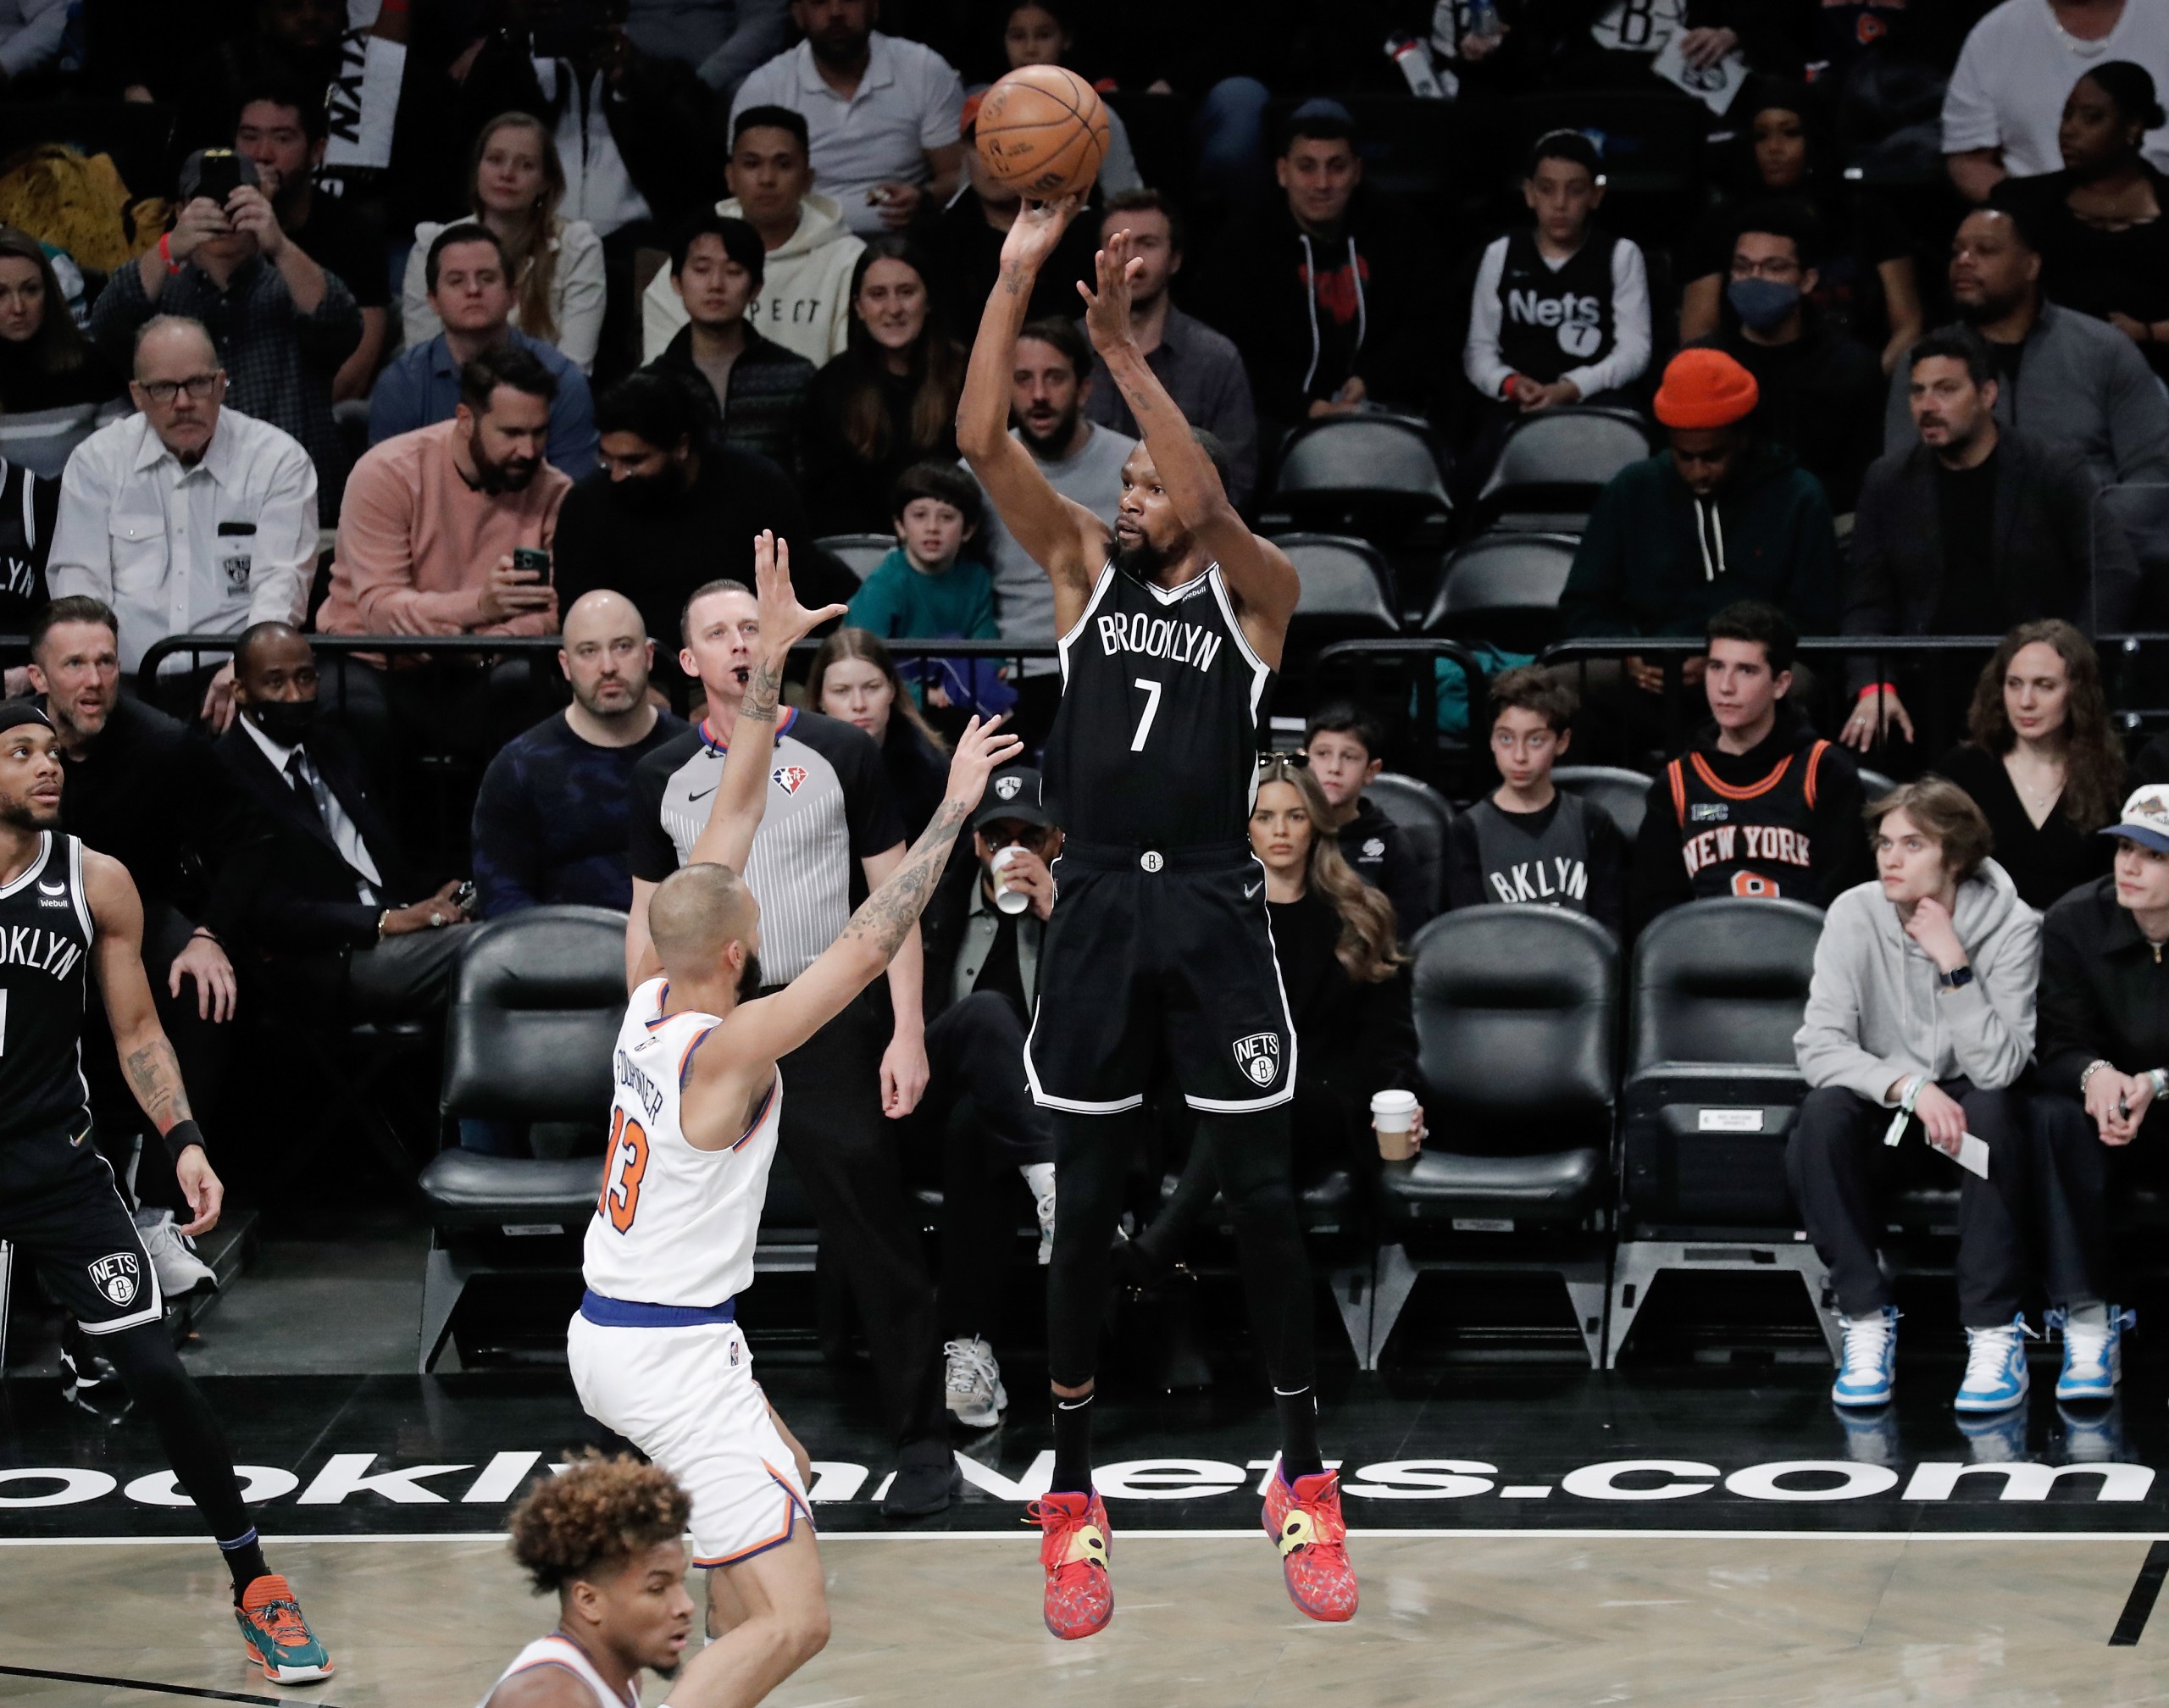 epa09822673 Brooklyn Nets forward Kevin Durant shoots (C) shoots over New York Knicks guard Evan Fournier during the first half of the NBA basketball game between the Brooklyn Nets and the New York Knicks  at Barclays Center in  Brooklyn, New York, USA, 13 March  2022.  EPA/Peter Foley SHUTTERSTOCK OUT